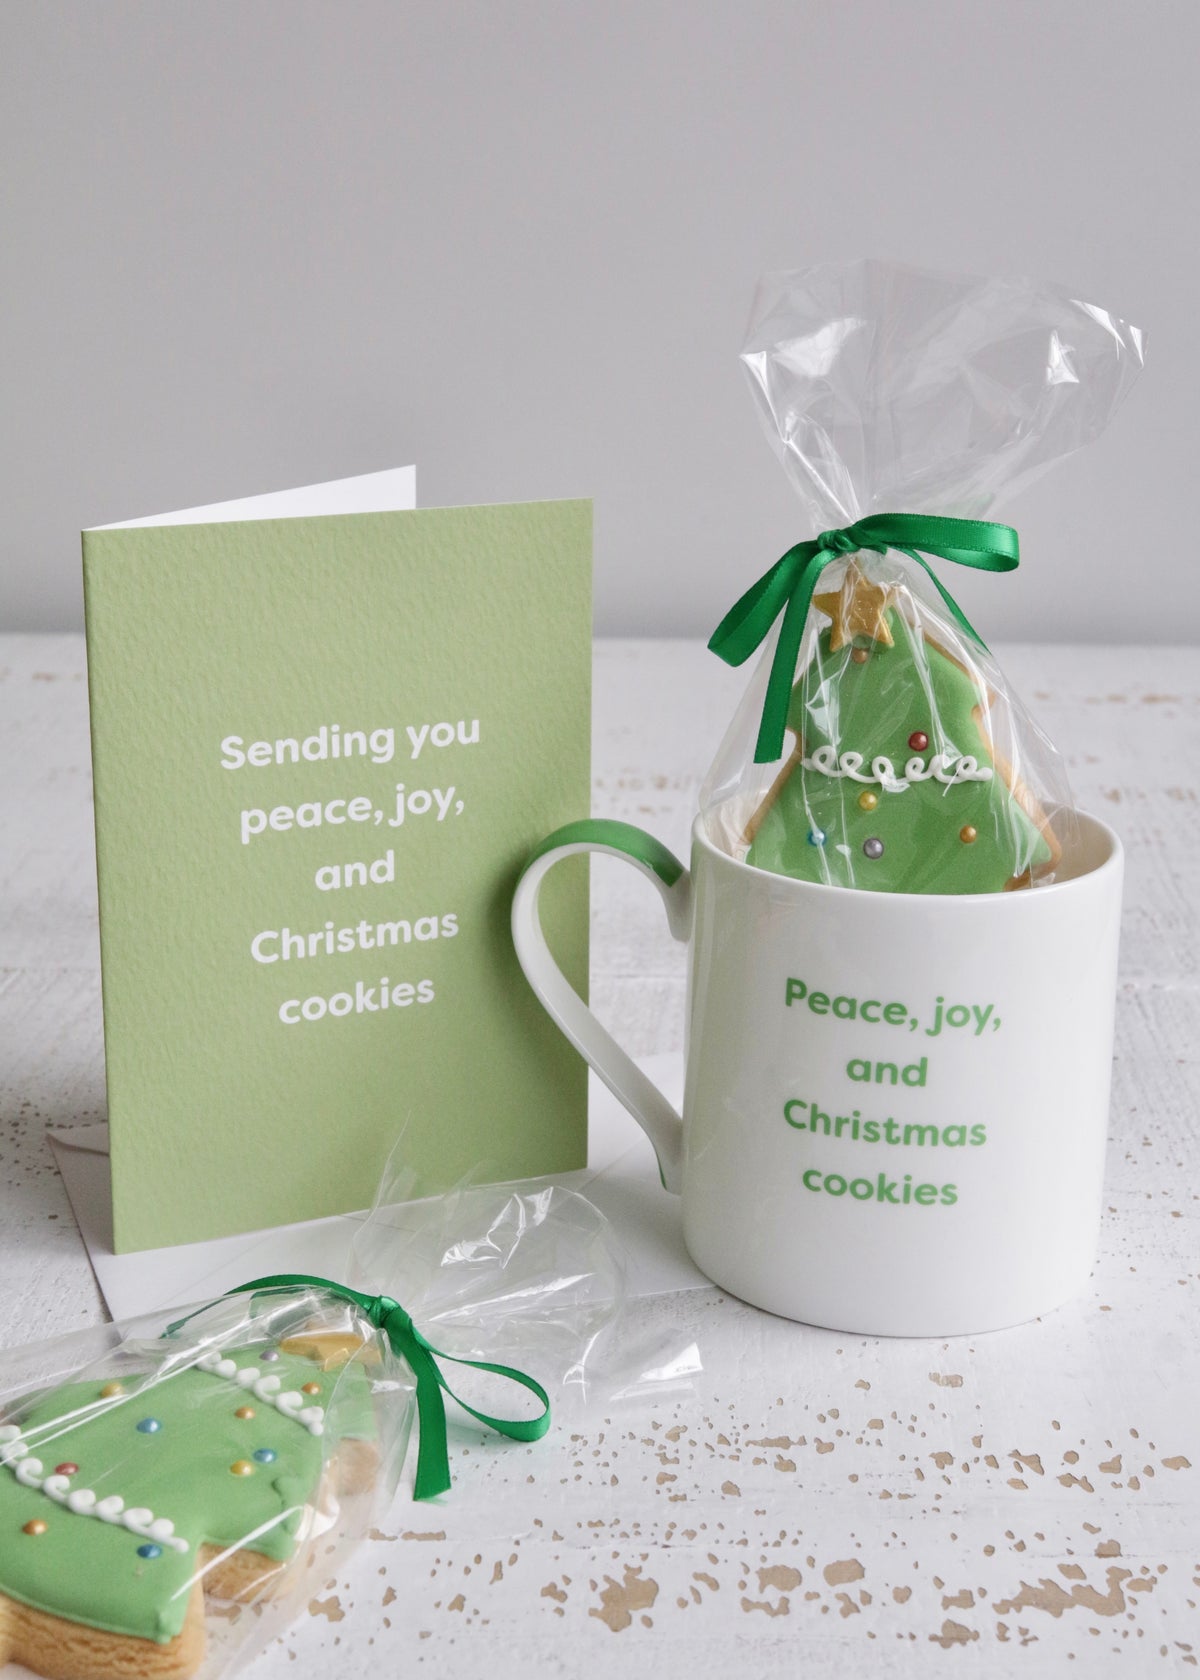 Peace Joy and Christmas Cookies Mug & Greeting Card with Christmas Tree Biscuits